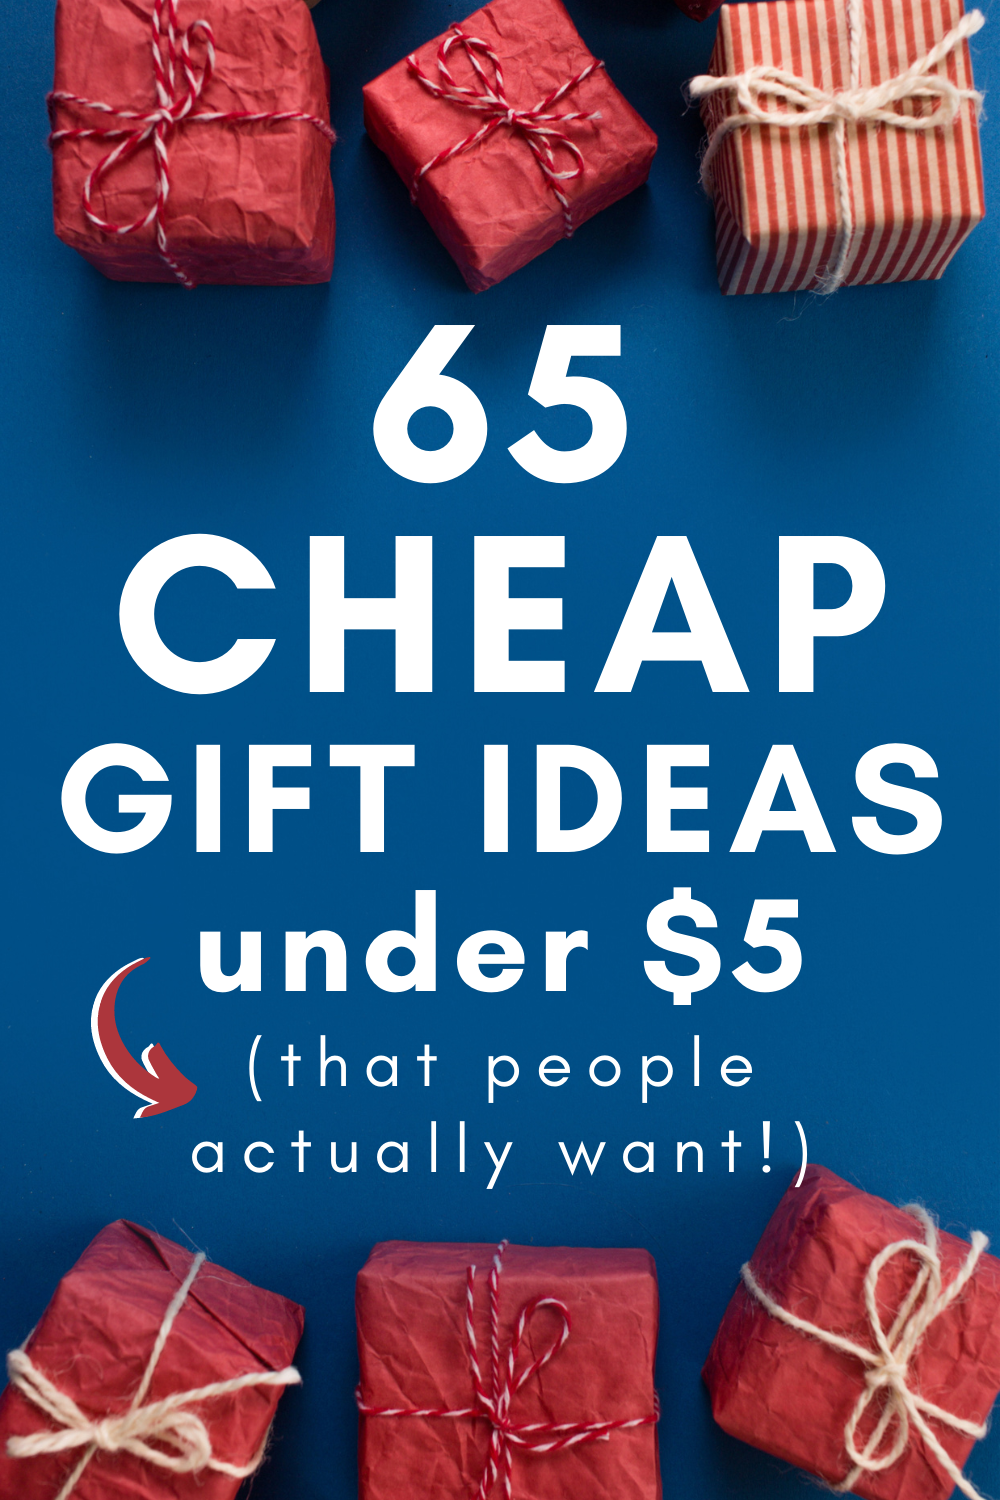 https://www.unexpectedlydomestic.com/wp-content/uploads/2020/12/gifts-under-5-dollars.png